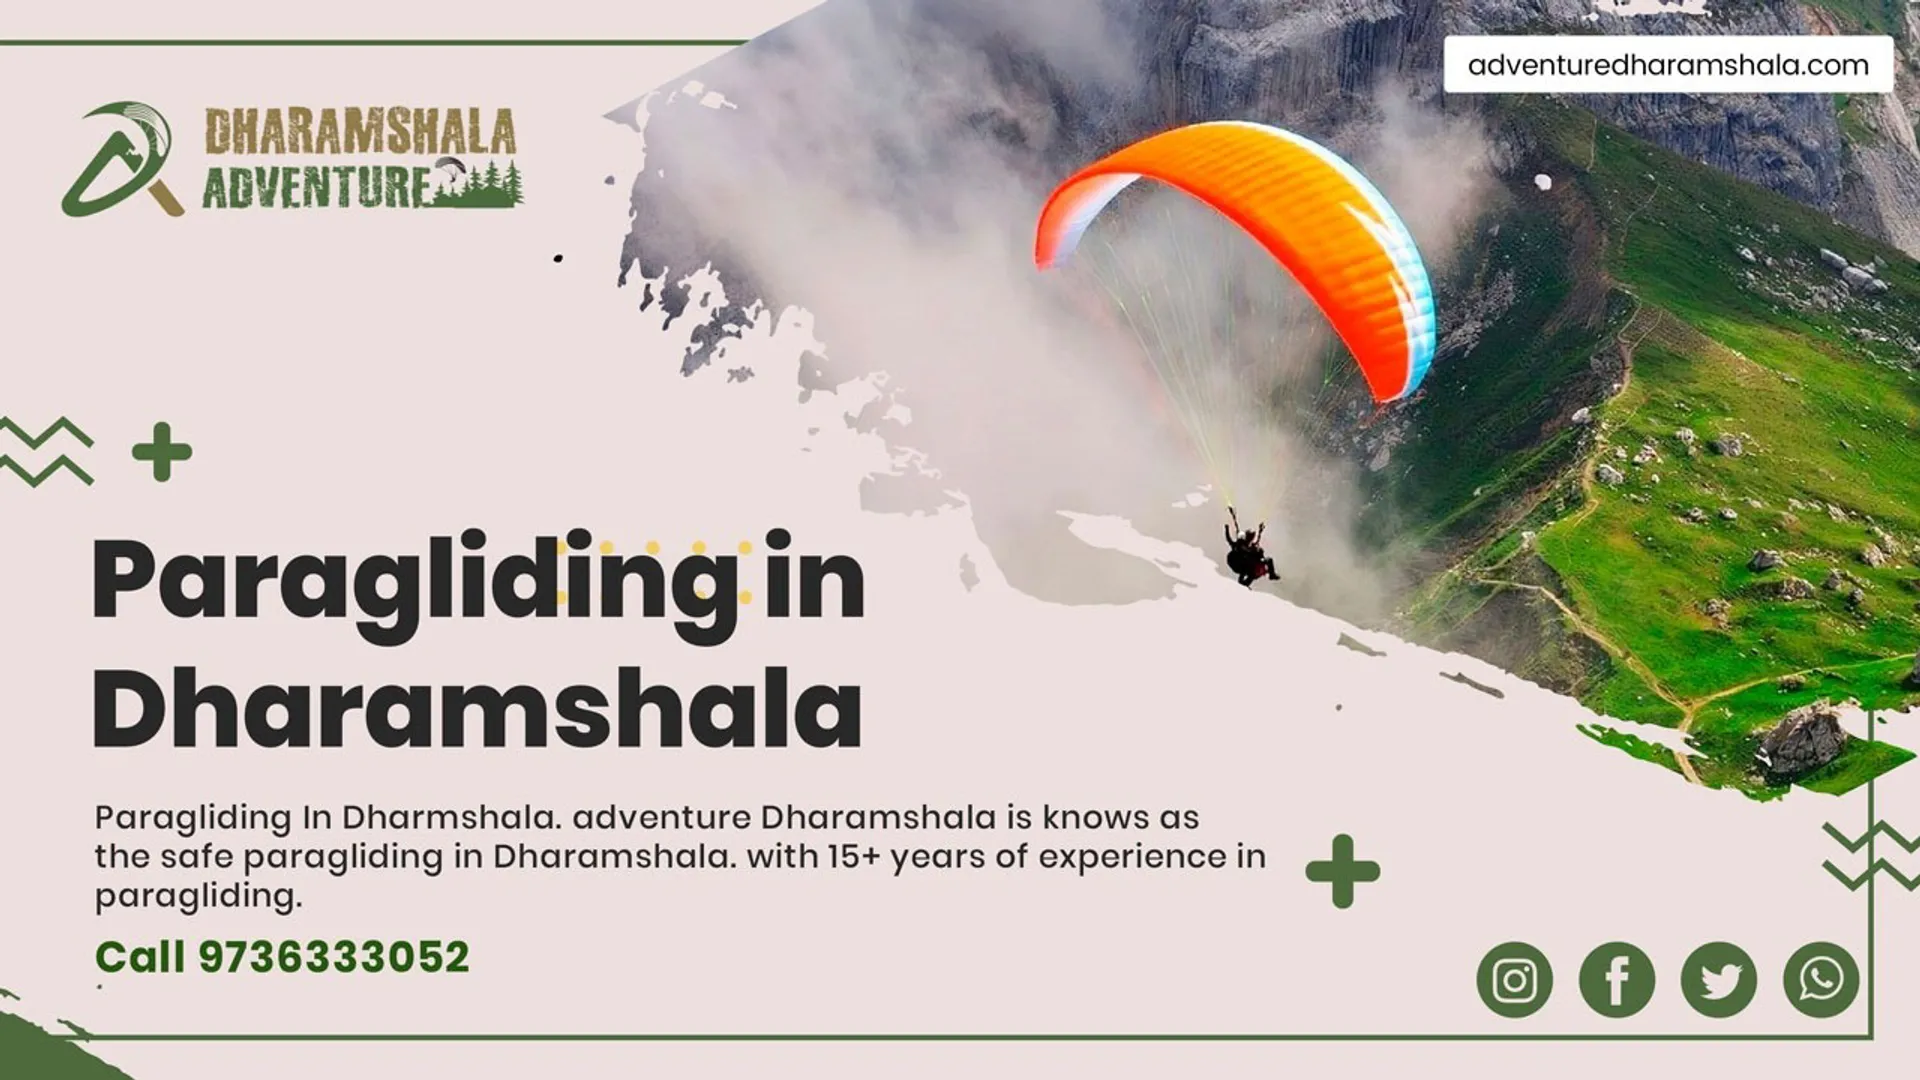 Experience the ultimate thrill of paragliding in Dharamshala with Adventure Dharamshala! Set against the breathtaking backdrop of the Himalayas, our paragliding adventure promises an adrenaline-pumping journey like no other.

With the guidance of our skilled and certified instructors, even first-time flyers can take to the skies with confidence. Feel the rush of wind as you soar high above lush valleys and majestic peaks, enjoying a bird's-eye view of Dharamshala's stunning landscapes.

Adventure Dharamshala prioritizes safety, ensuring that your paragliding experience is not only exhilarating but also secure. Whether you are an adventure enthusiast seeking an adrenaline rush or a nature lover wanting to experience the beauty of Dharamshala from a unique vantage point, our paragliding adventure caters to all.

Embrace the freedom of flight and create memories that will stay with you forever. Book your paragliding experience with Adventure Dharamshala today and get ready to have an unforgettable adventure in the skies above Dharamshala! https://g.co/kgs/EvhQuC